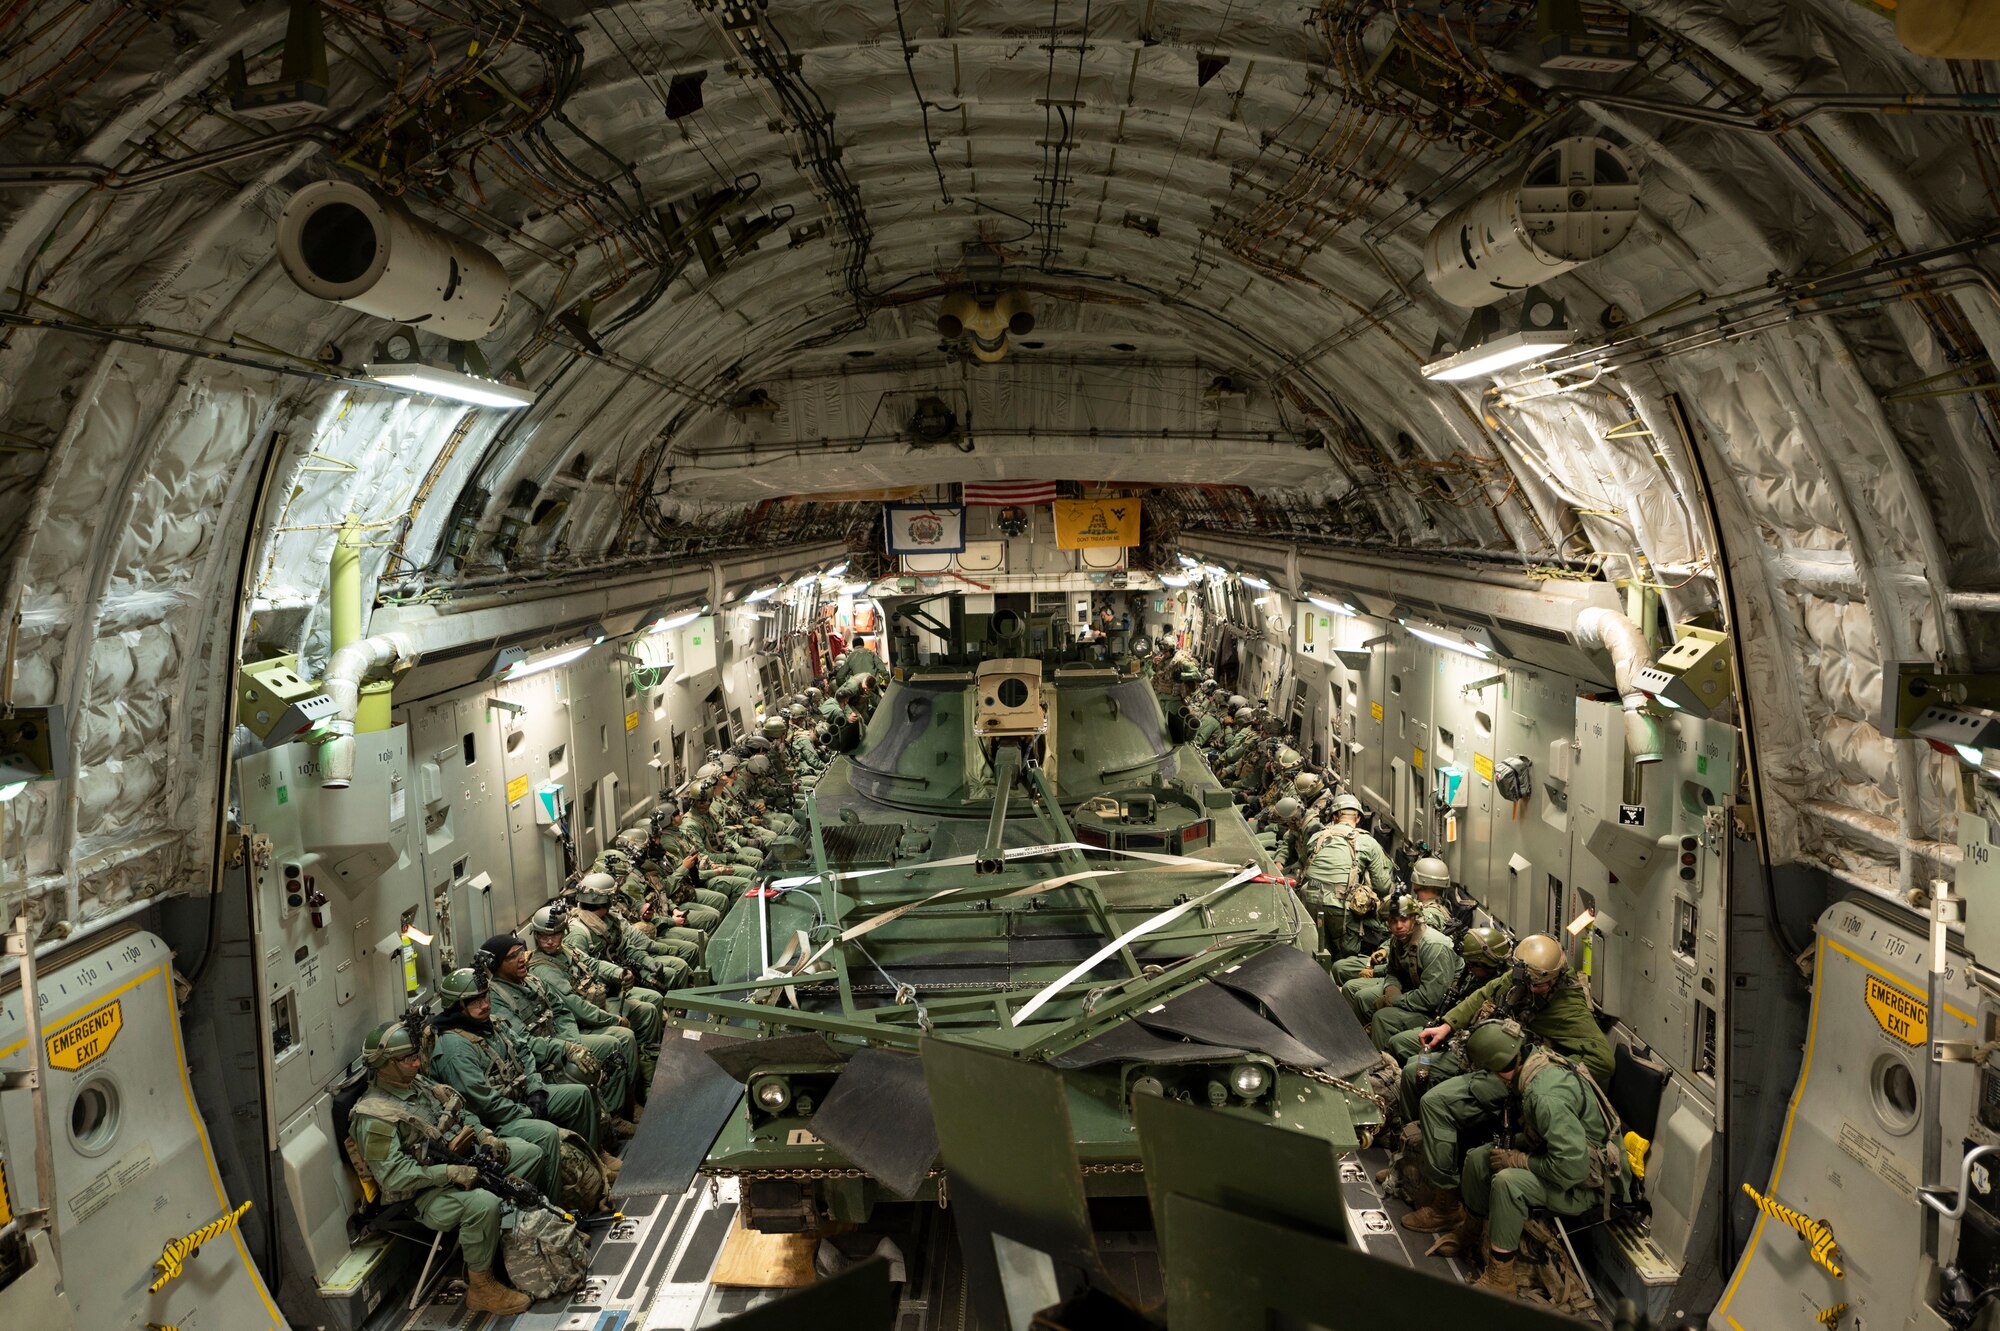 Over 50 U.S. Army soldiers destined for a landing zone in Ft. Polk, Louisiana, await takeoff while on a 167th C-17 Globemaster III aircraft with several military land vehicles during exercise Green Flag Little Rock 22-03 at Alexandria International Airport, Louisiana, Jan. 10, 2022. GFLR 22-03 focused on three joint-accredited items: combat airlift; survival, evasion, resistance and escape; and aeromedical evacuation.